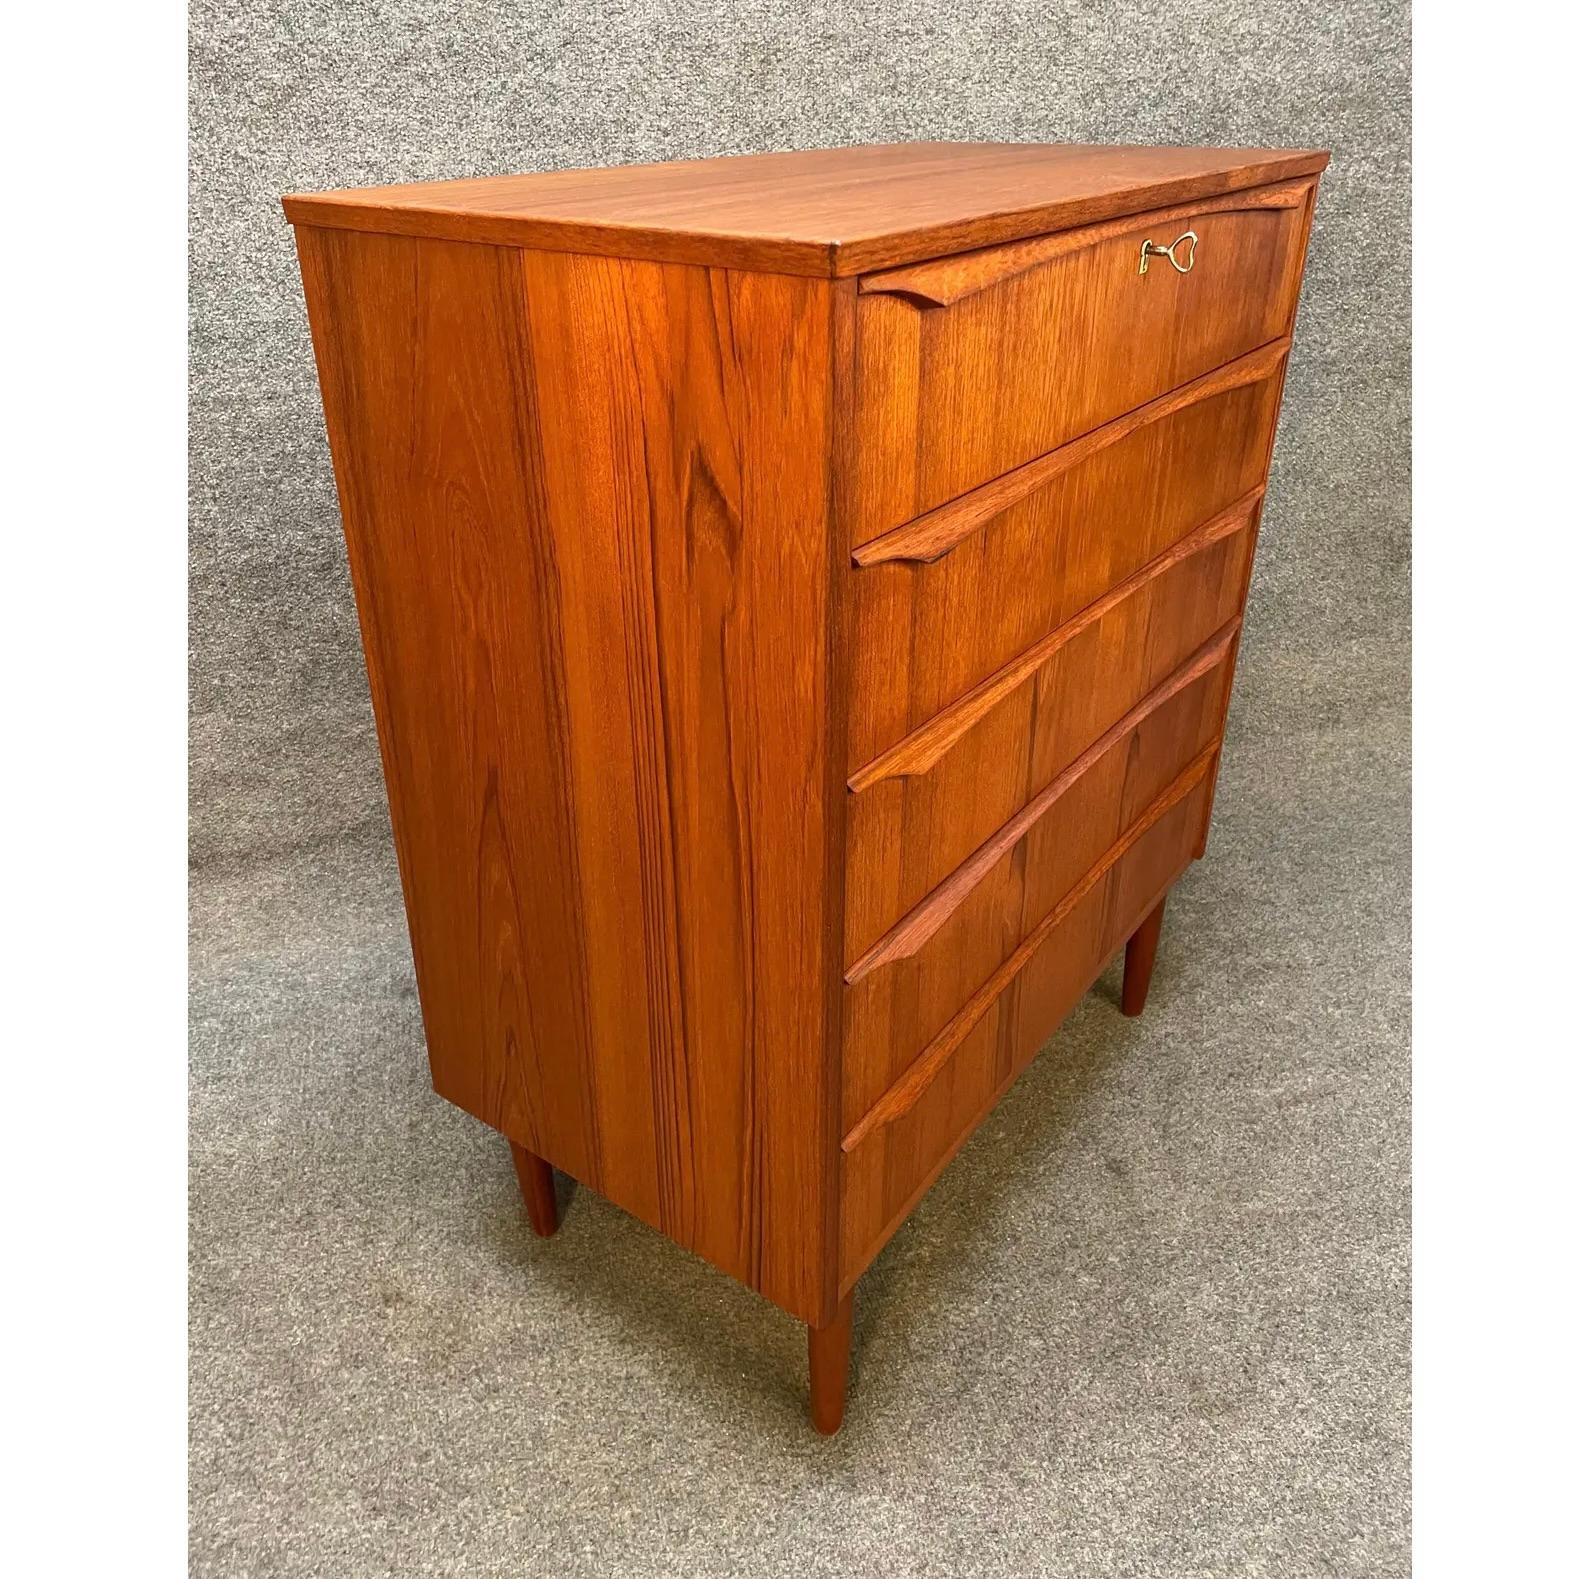 Here is a beautiful scandinavian modern highboy dresser in teak wood manufactured in Denmark in the 1960's. This exquisite dresser, recently imported from Europe to California before its refinishing, features a vibrant wood grain, six dove tail